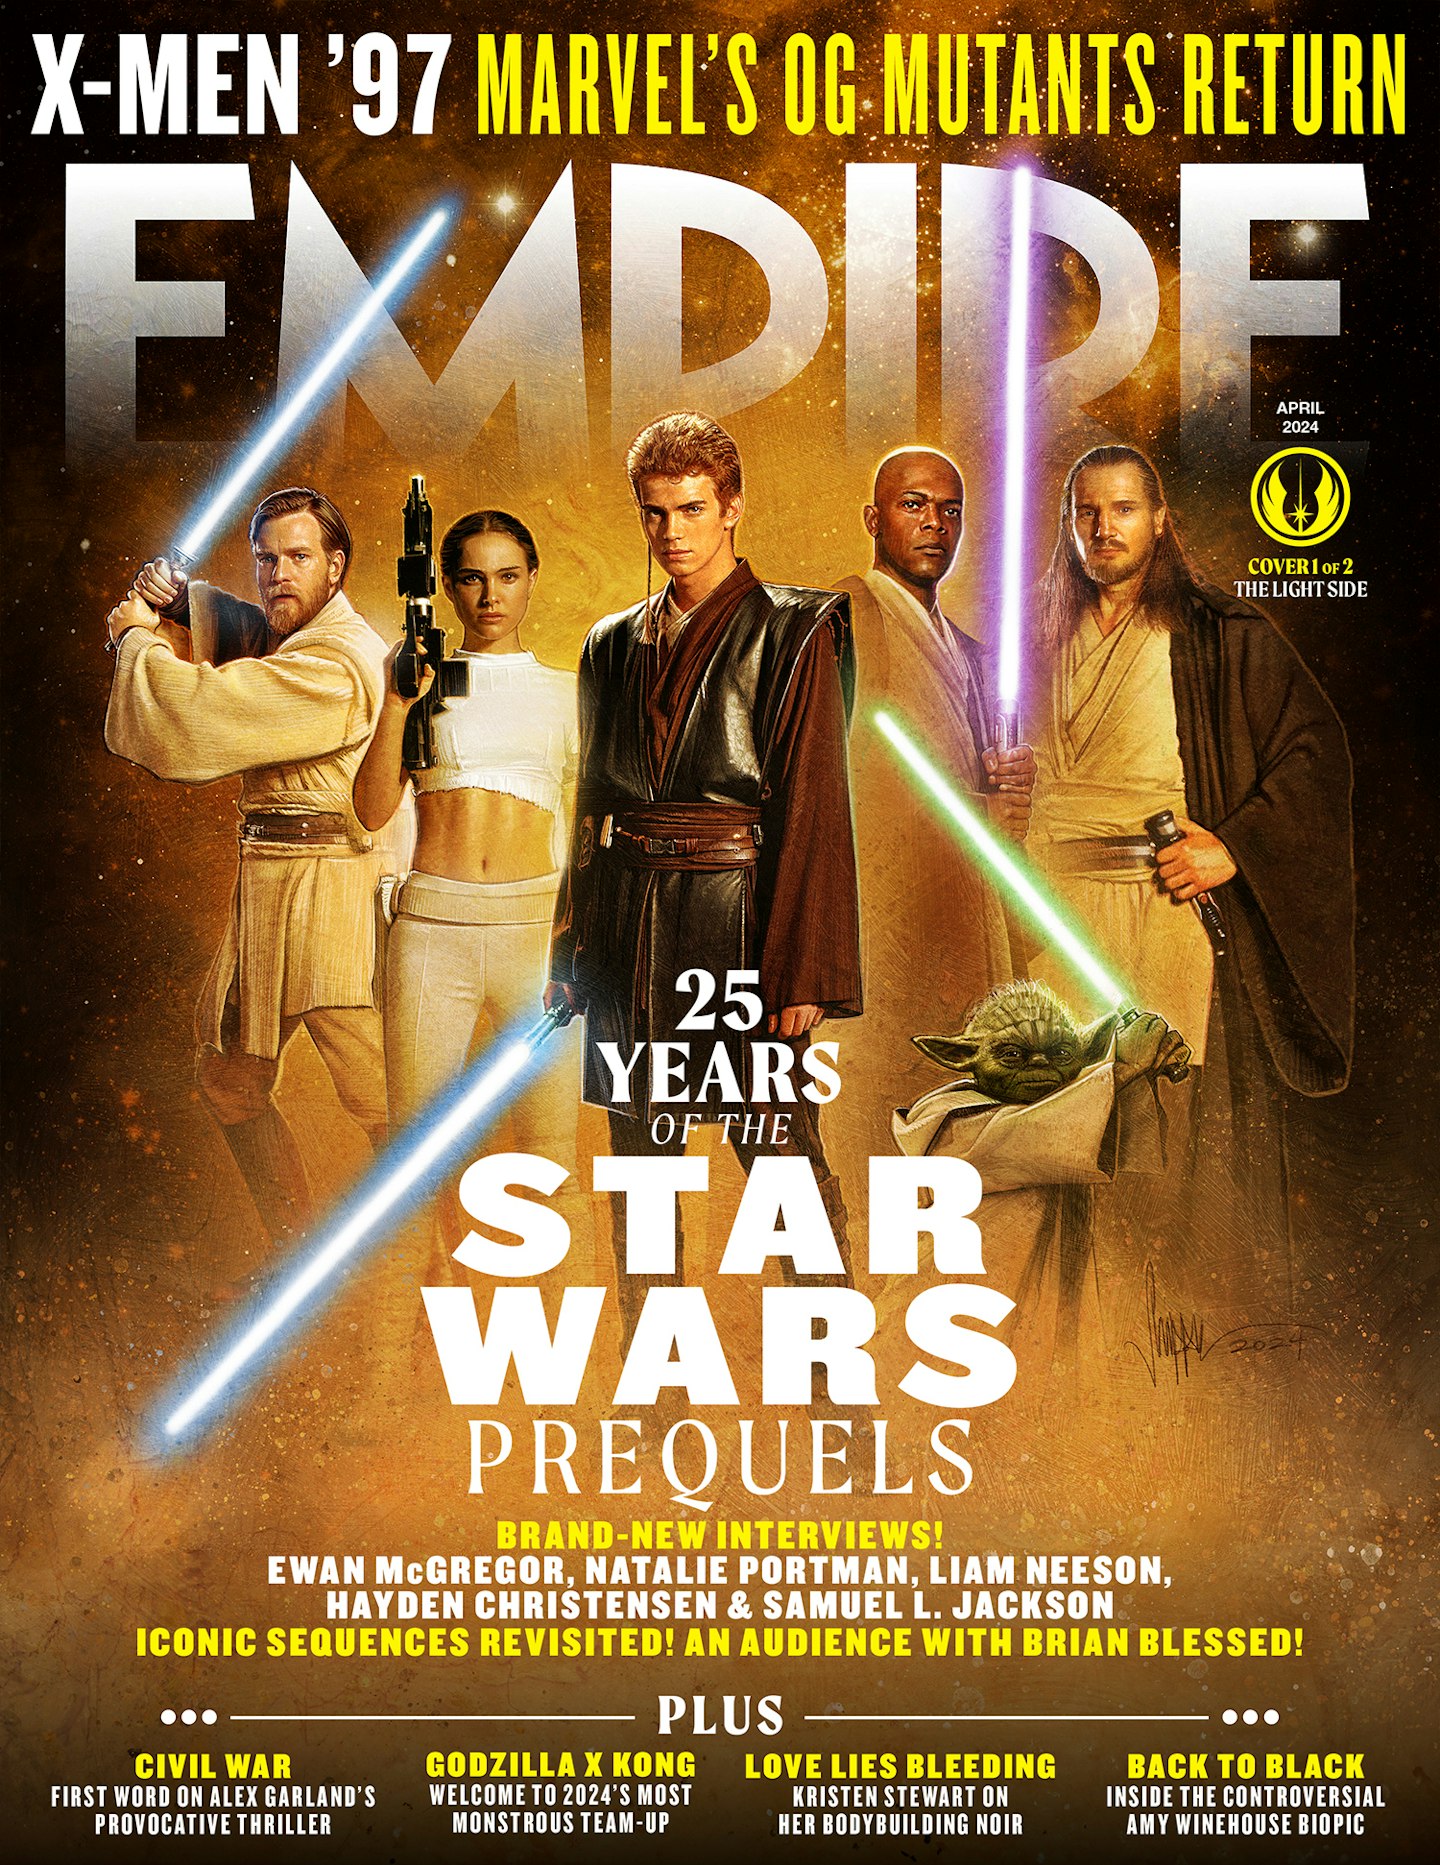 Empire – April 2024 – Star Wars Prequels issue light side cover